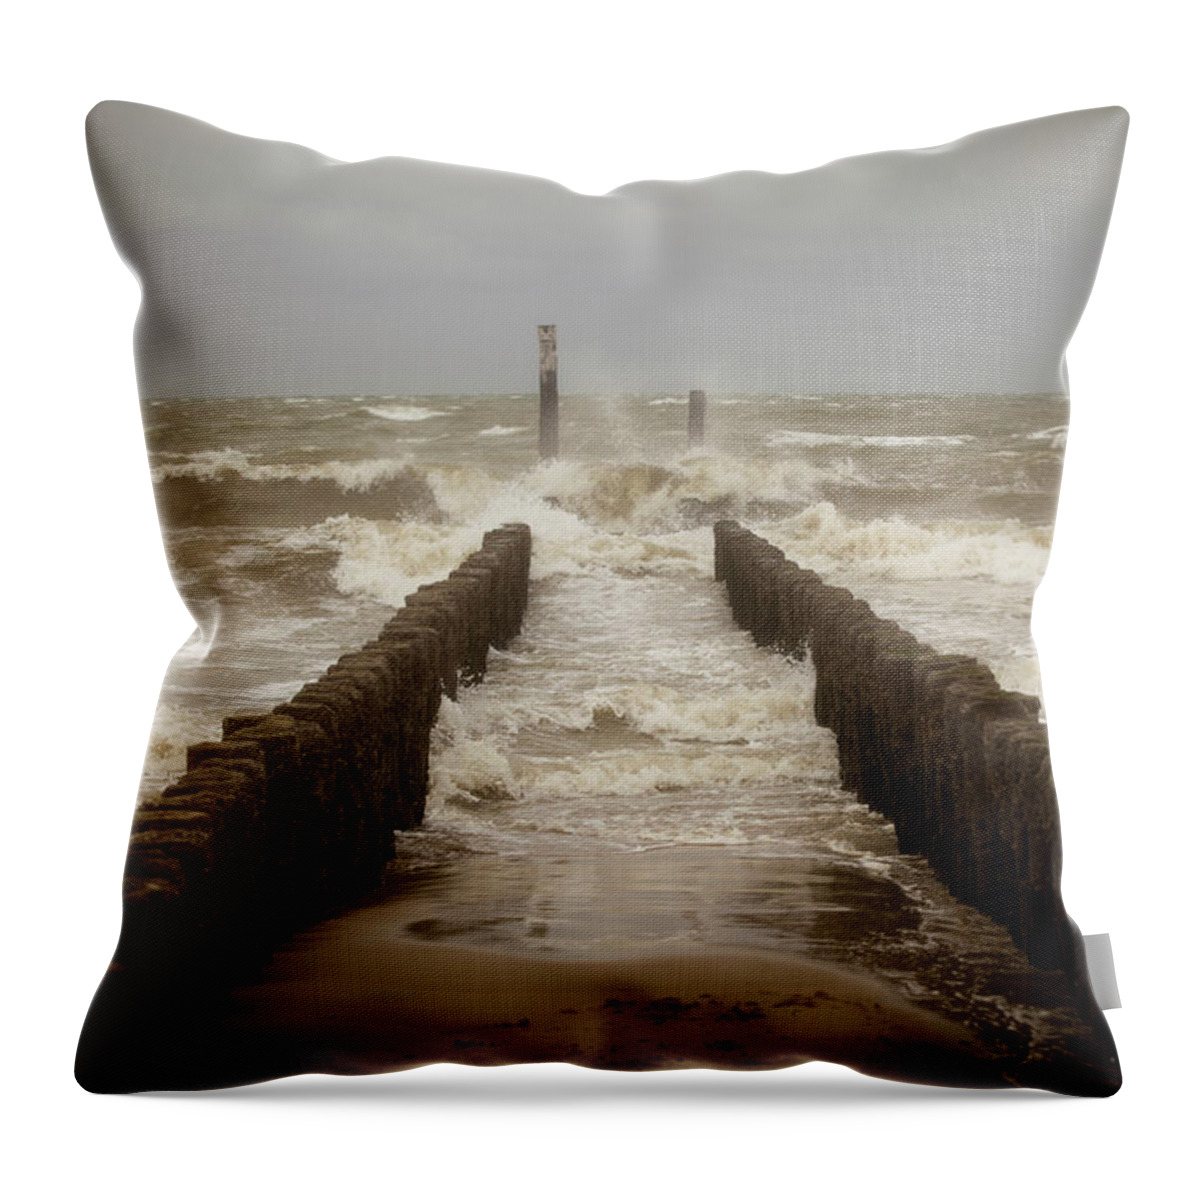 Wind Throw Pillow featuring the photograph Breakwater With Very Rough Sea by Noctiluxx